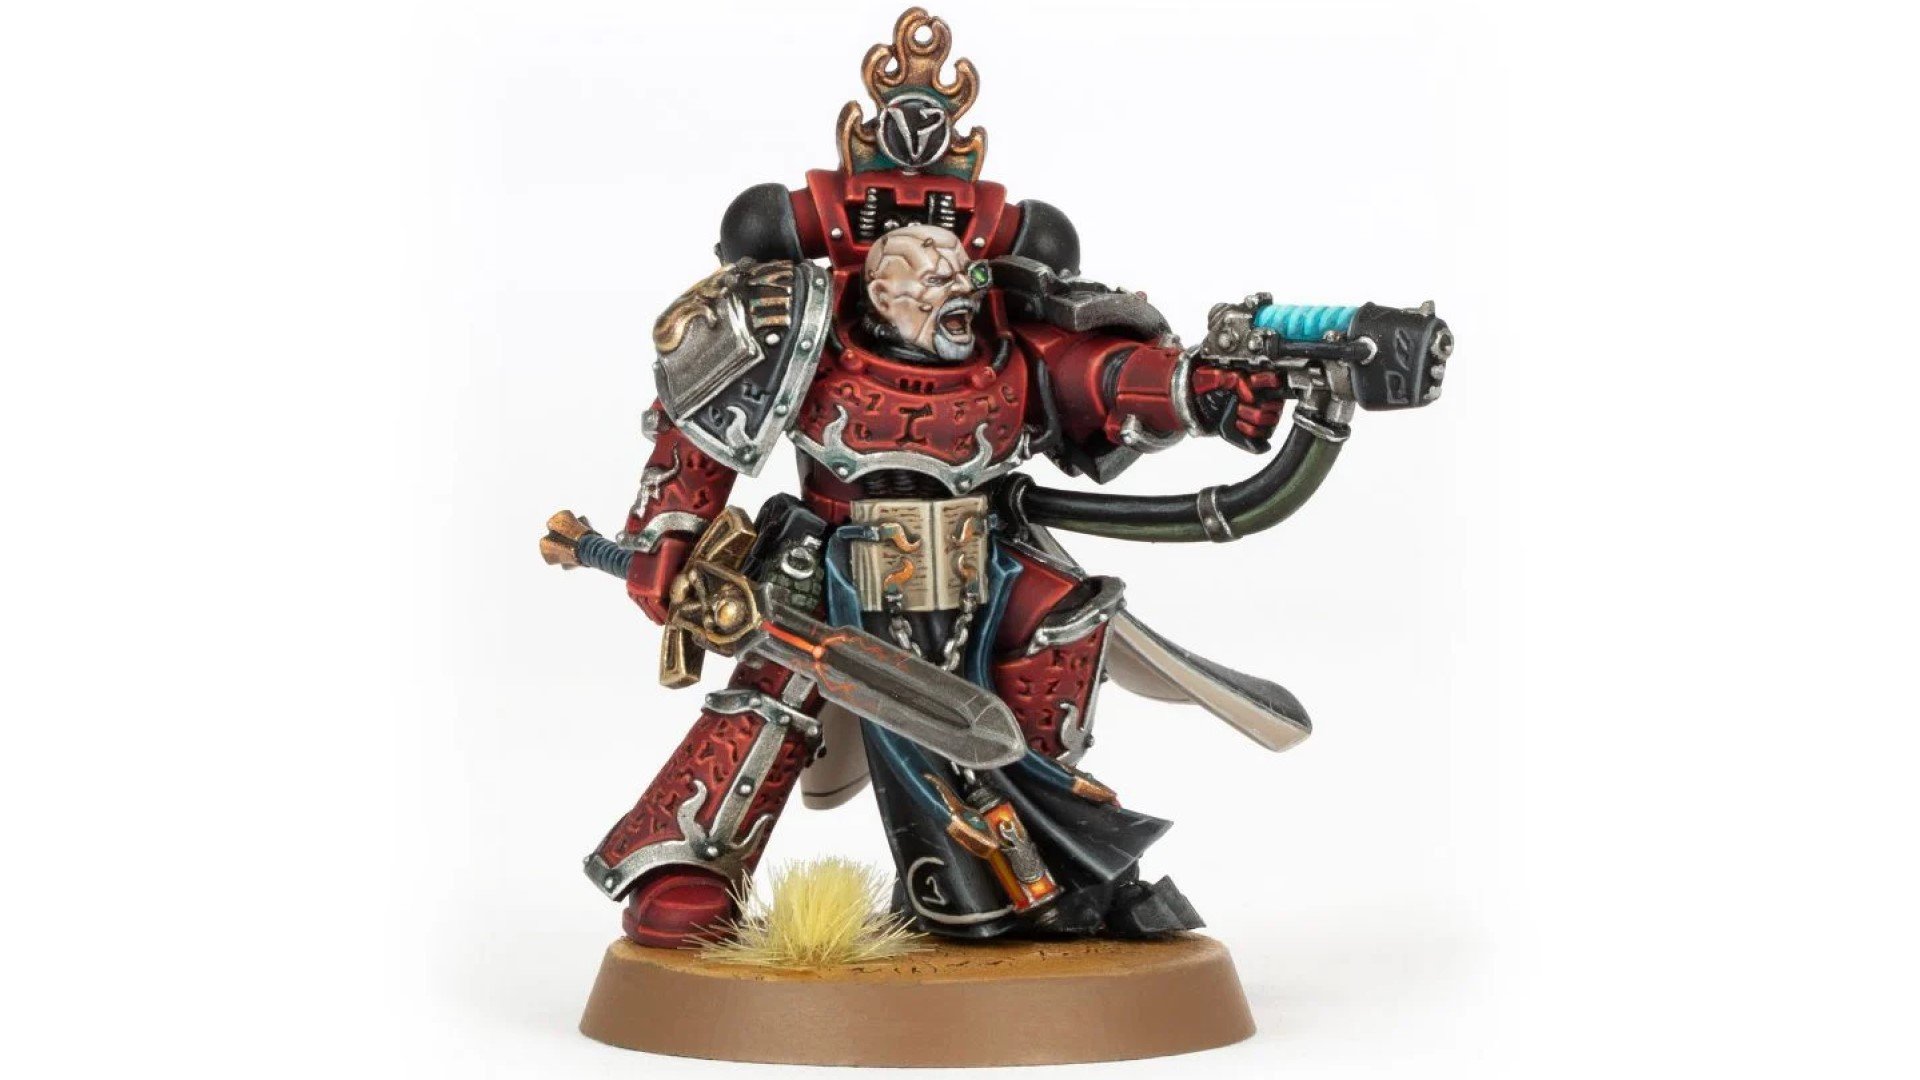 Forge World unveils new Horus Heresy chaos space marines